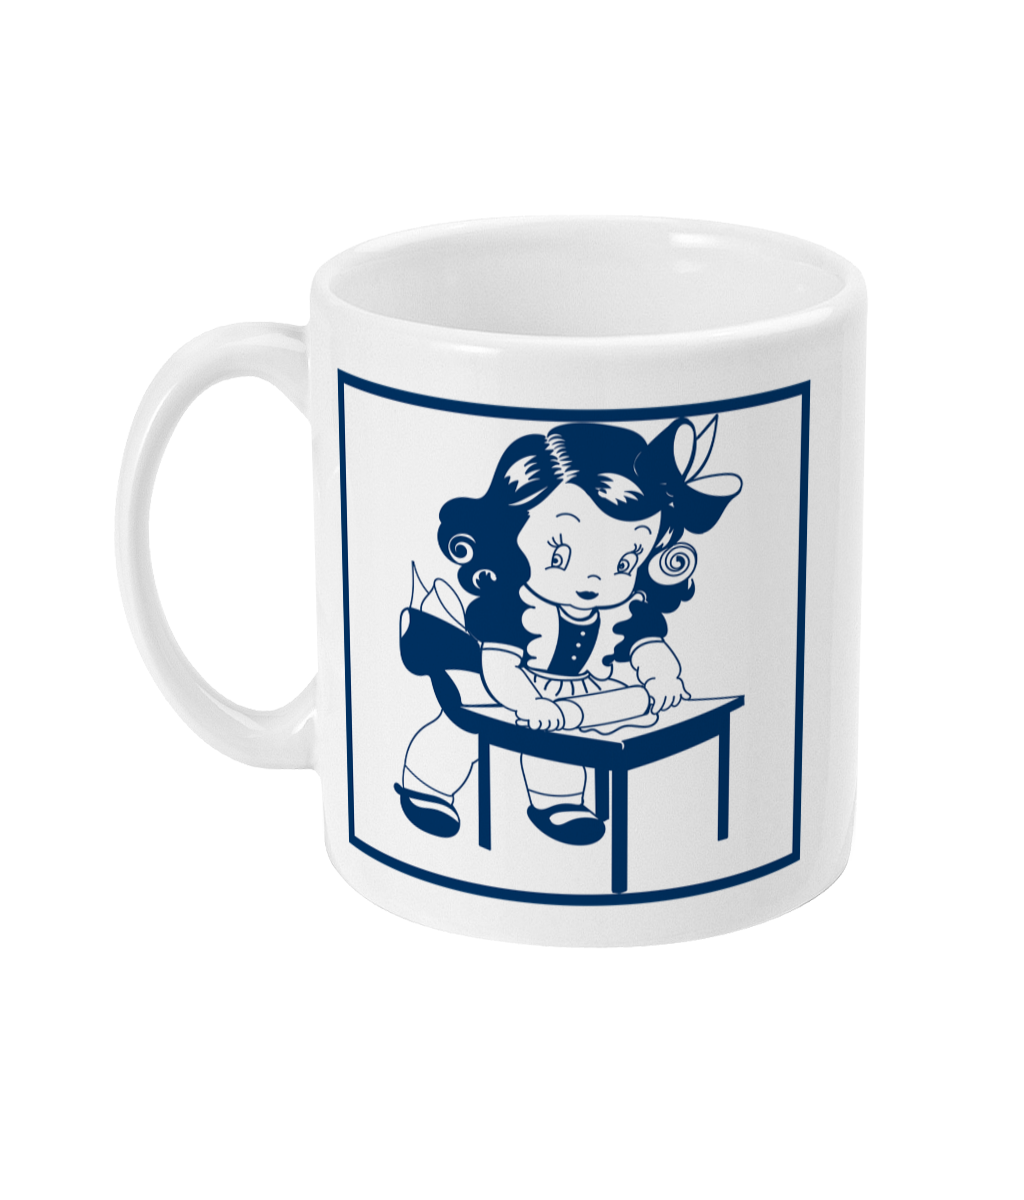 mug with image of a girl using a rolling pin